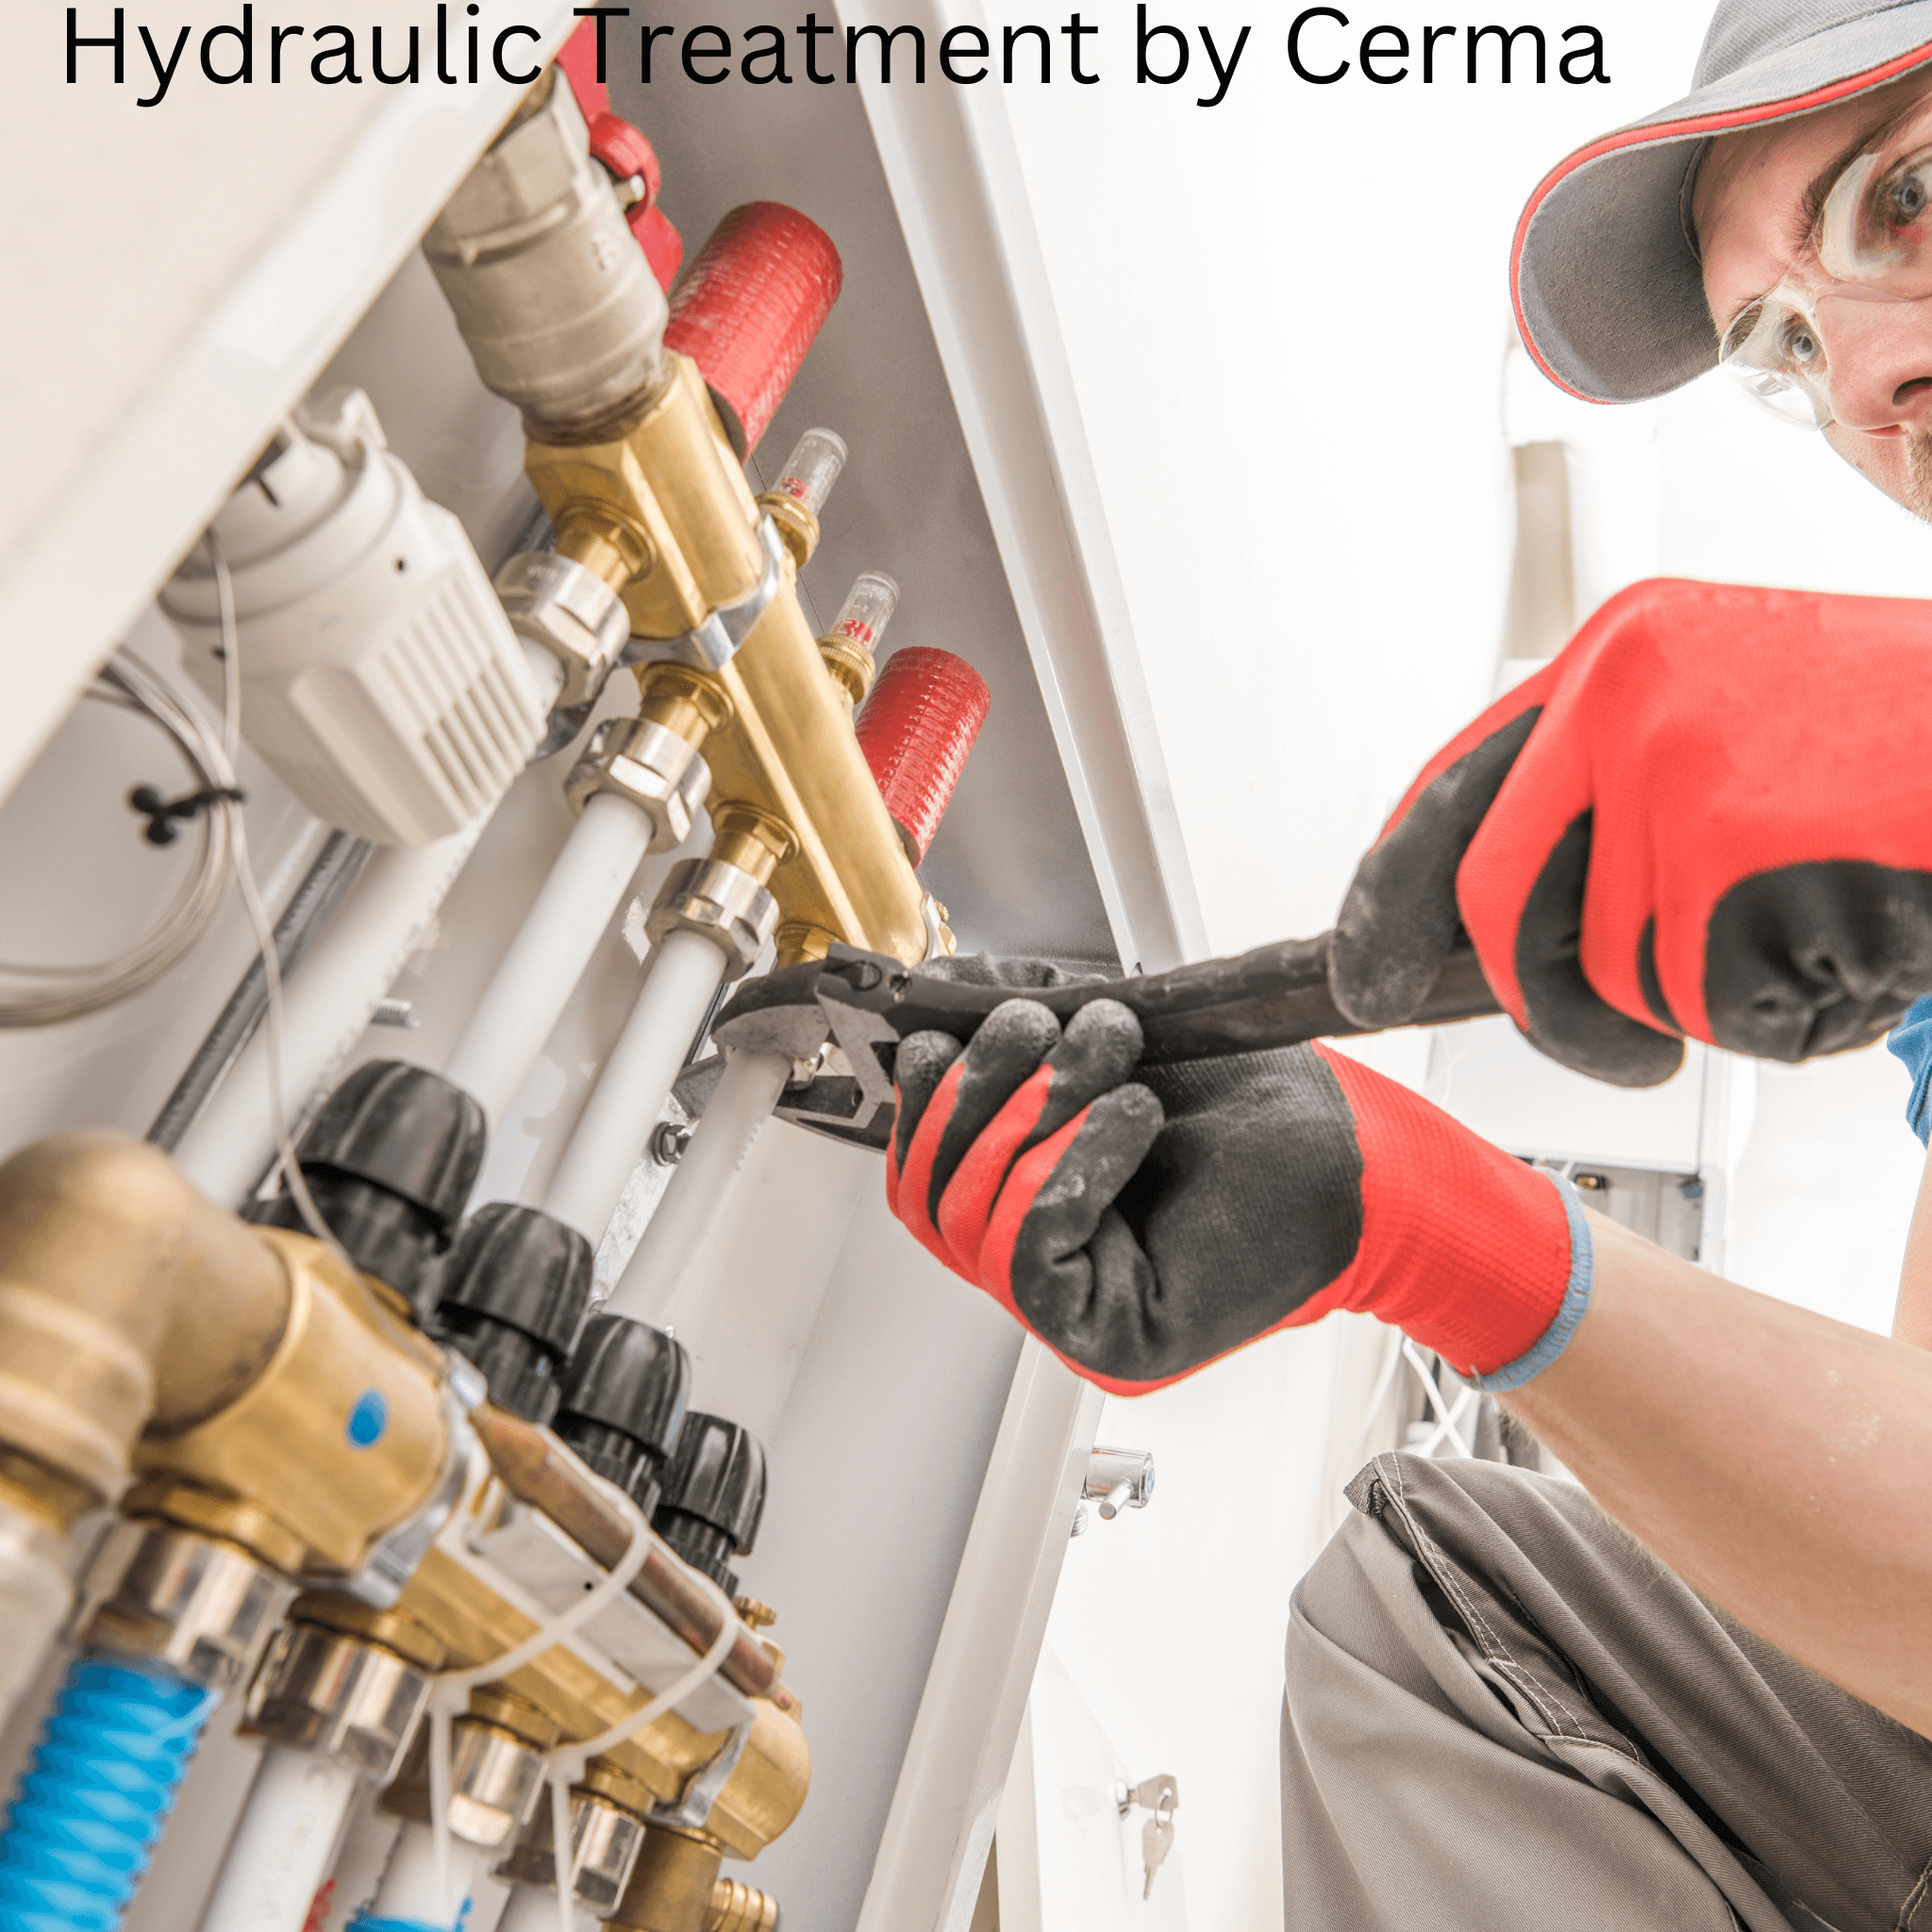 CERMA CERAMIC HYDRAULIC TREATMENT: ULTIMATE PROTECTION FOR YOUR VEHICLE'S HYDRAULIC SYSTEM